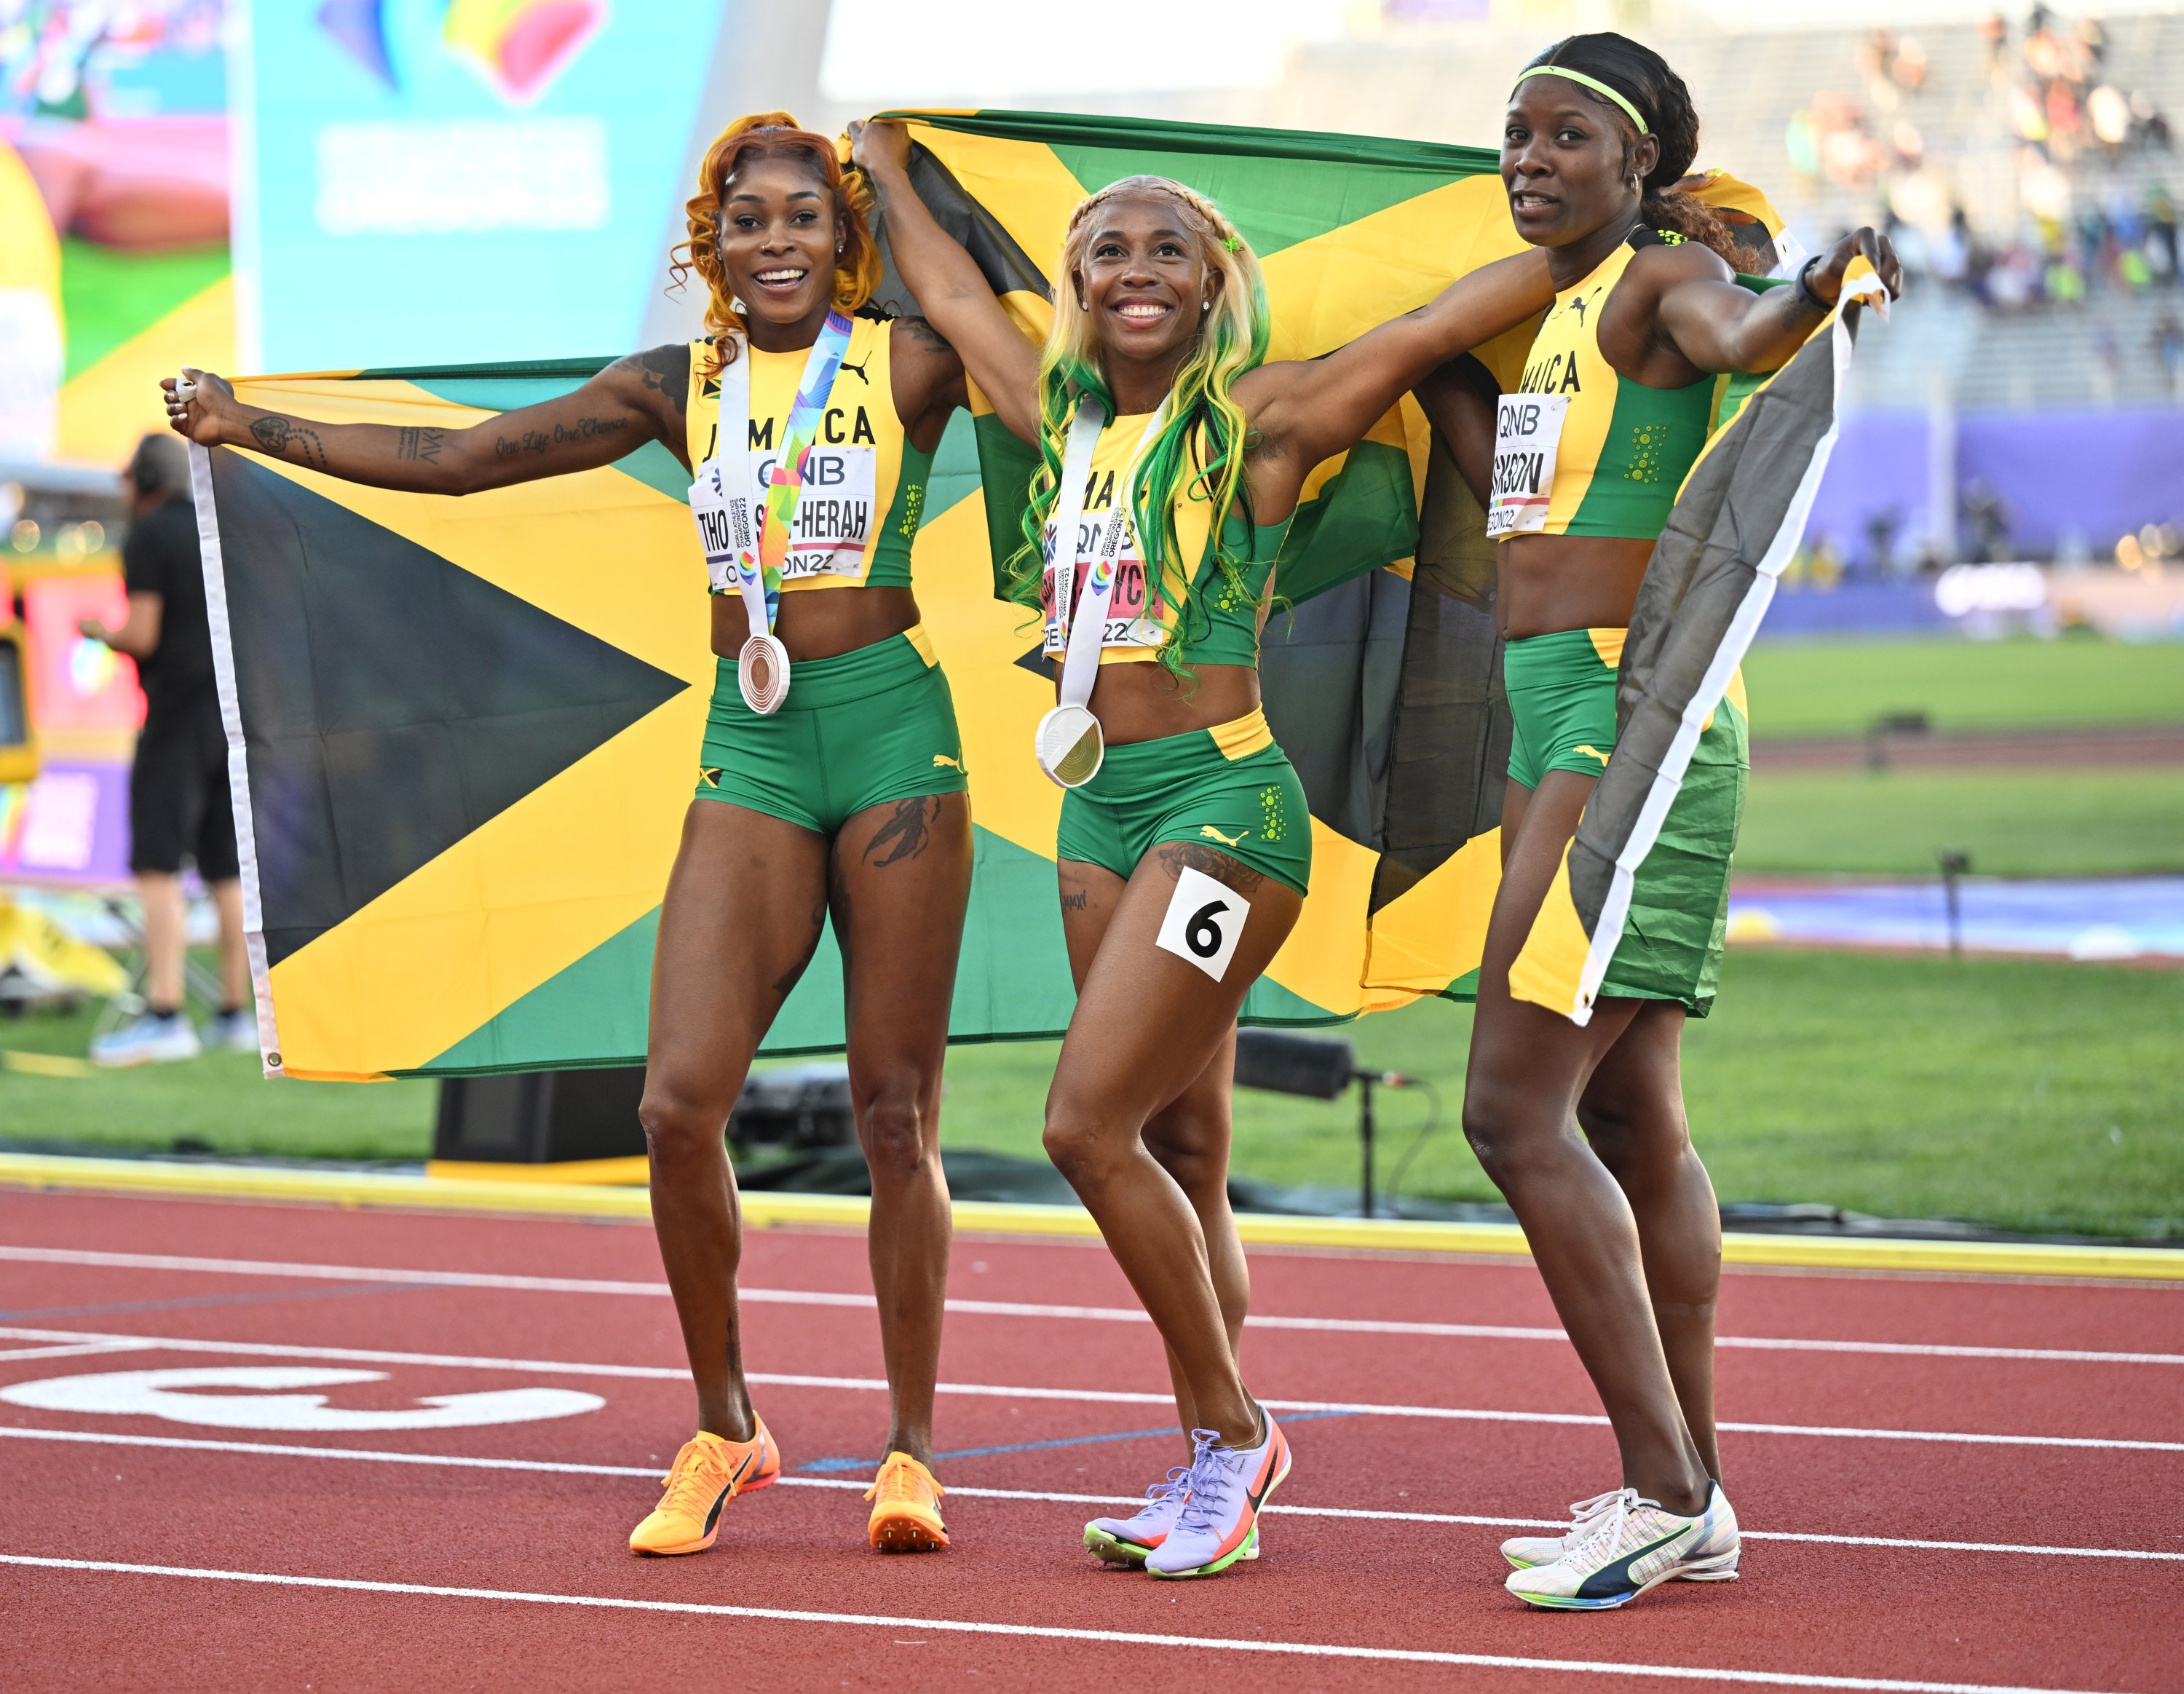 Fraser-Pryce Leads Jamaican Sweep in Women’s 100m